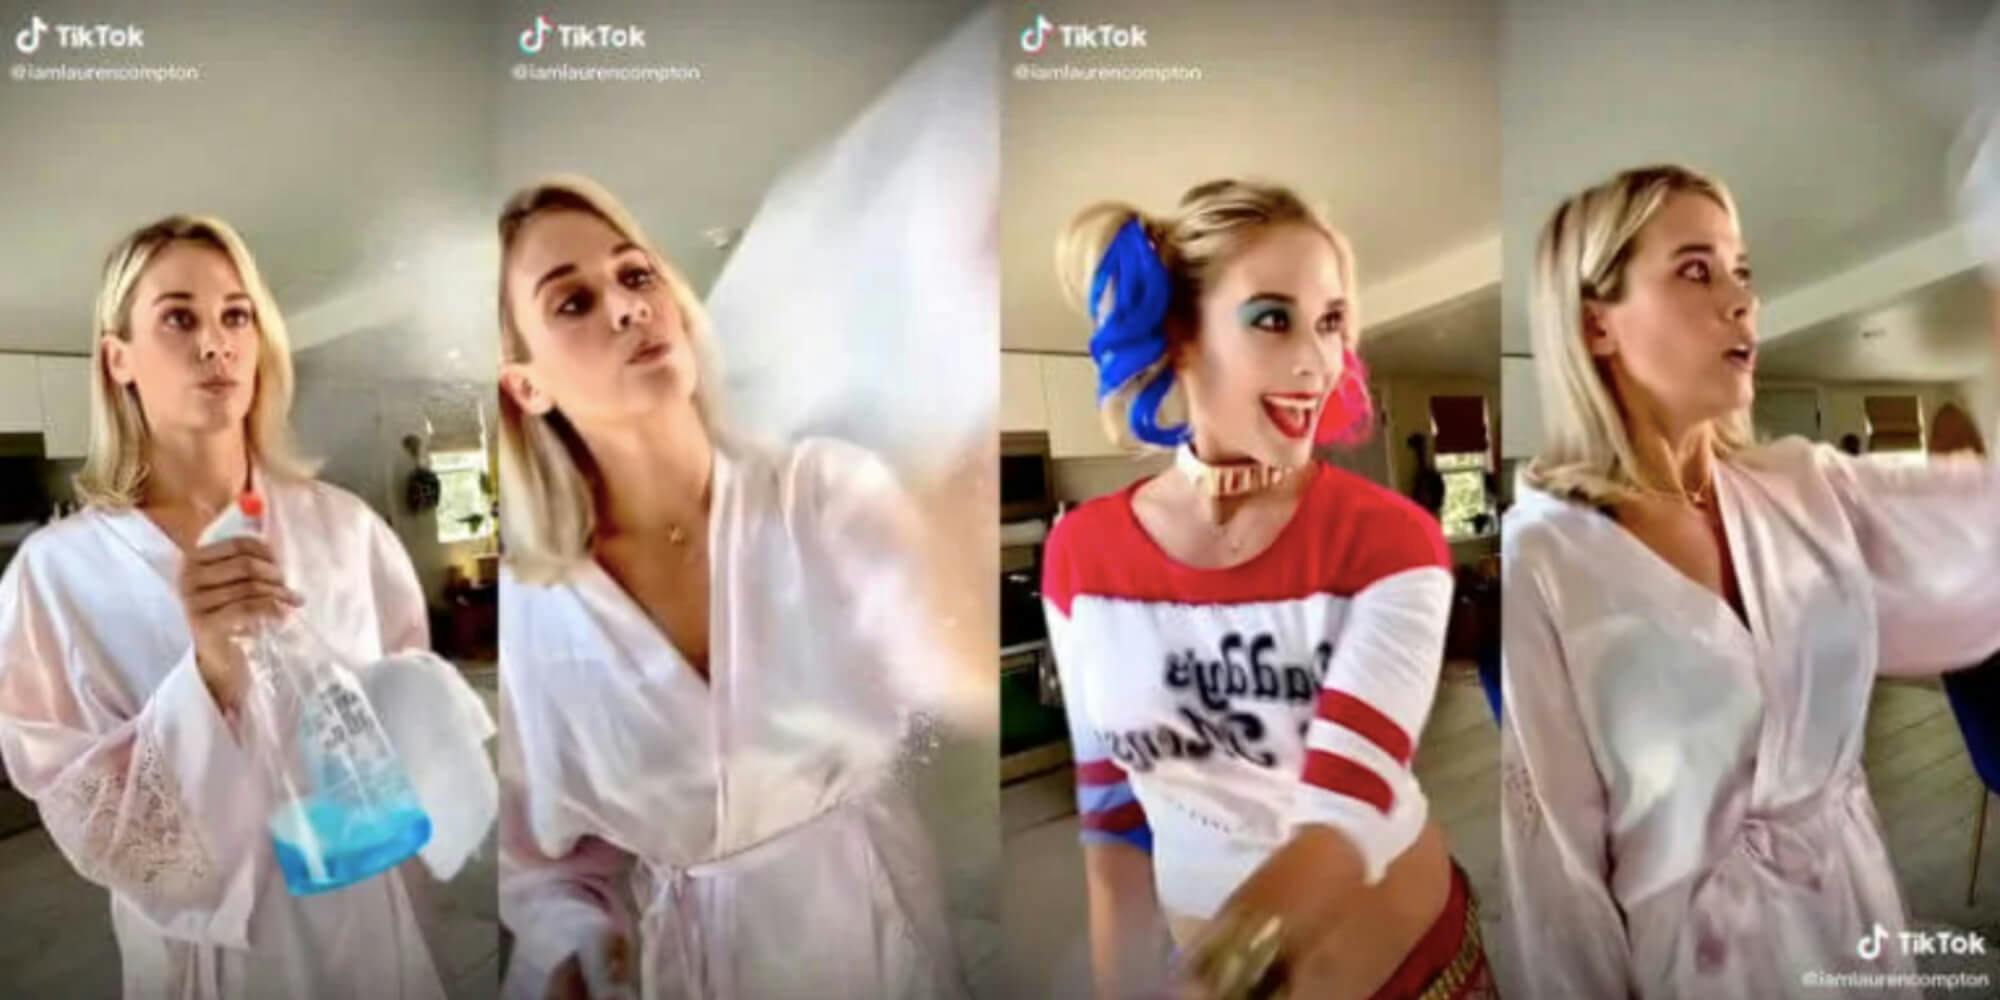 Four screenshots show a blonde-haired white woman wiping down a mirror. In the first two shots, she is wearing a bath robe. In the third, she is dressed like Harley Quinn. She returns to the bathrobe in the fourth shot.